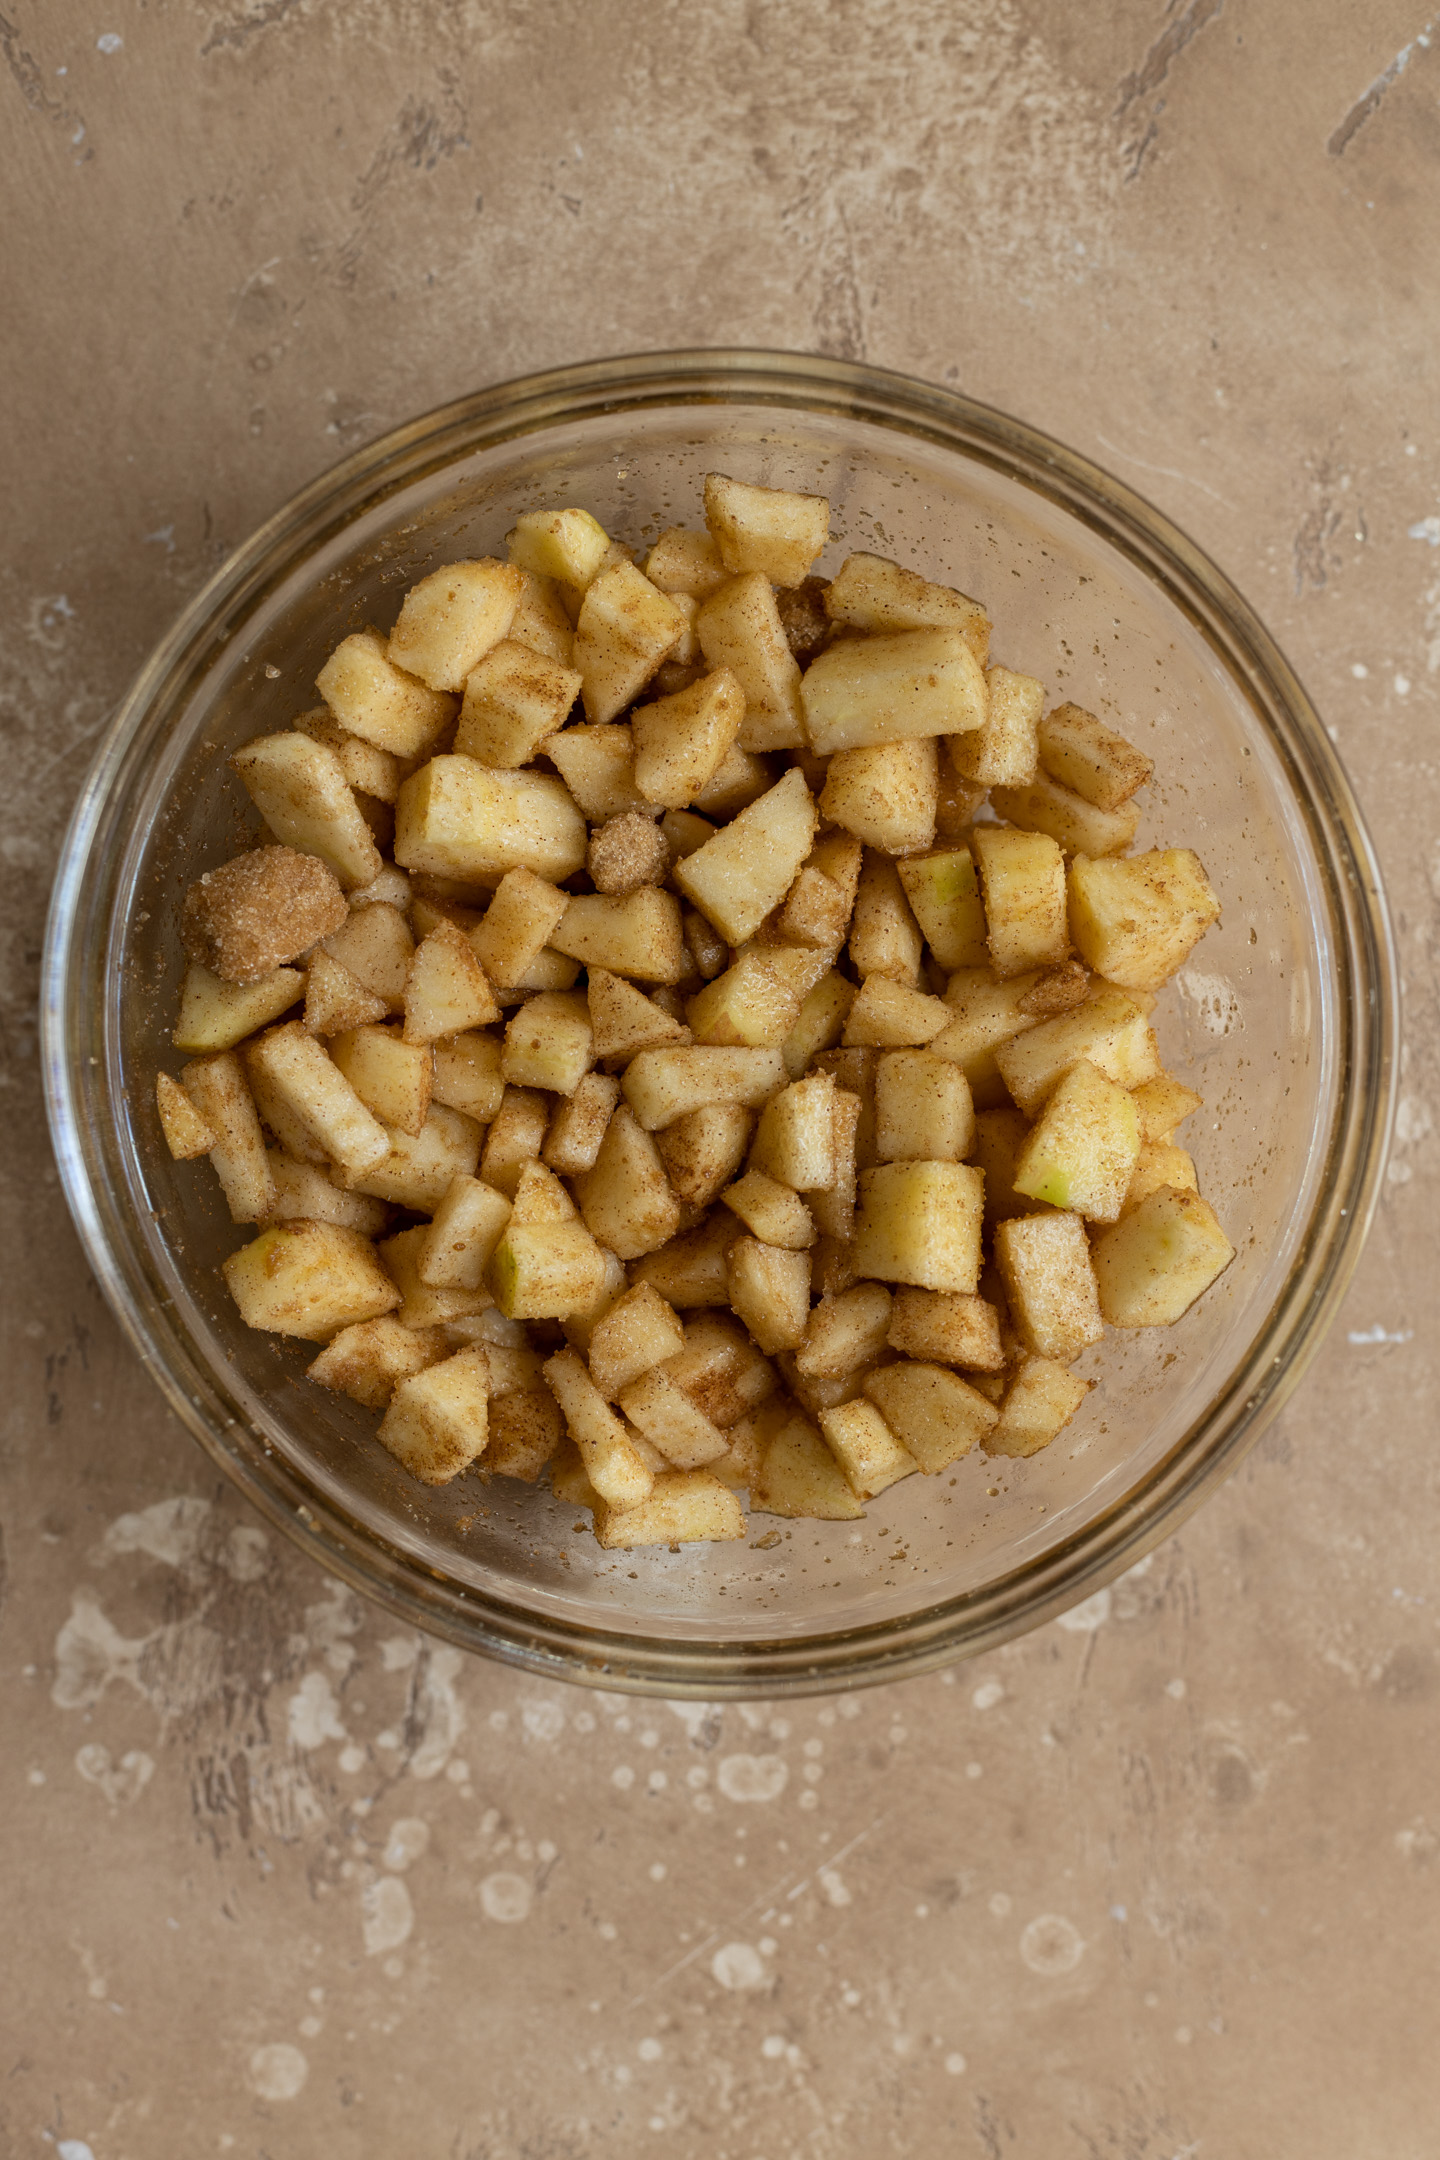 Diced spiced apples in a bowl.